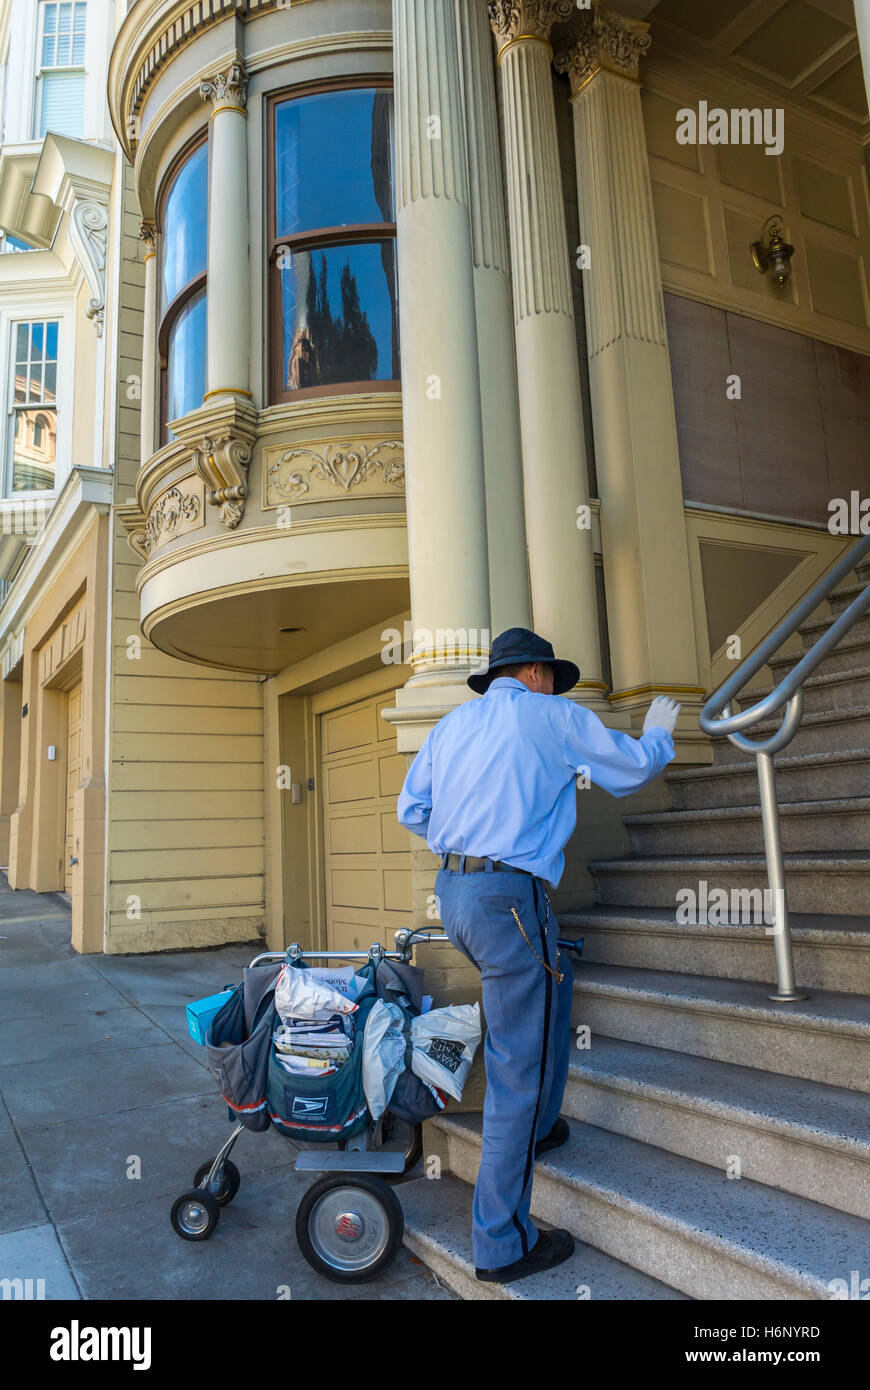 San Francisco, CA, USA, Mailman CLimbing Stairs to Deliver Mail at Victorian Townhouses in FIllmore District, people stairs walking Stock Photo